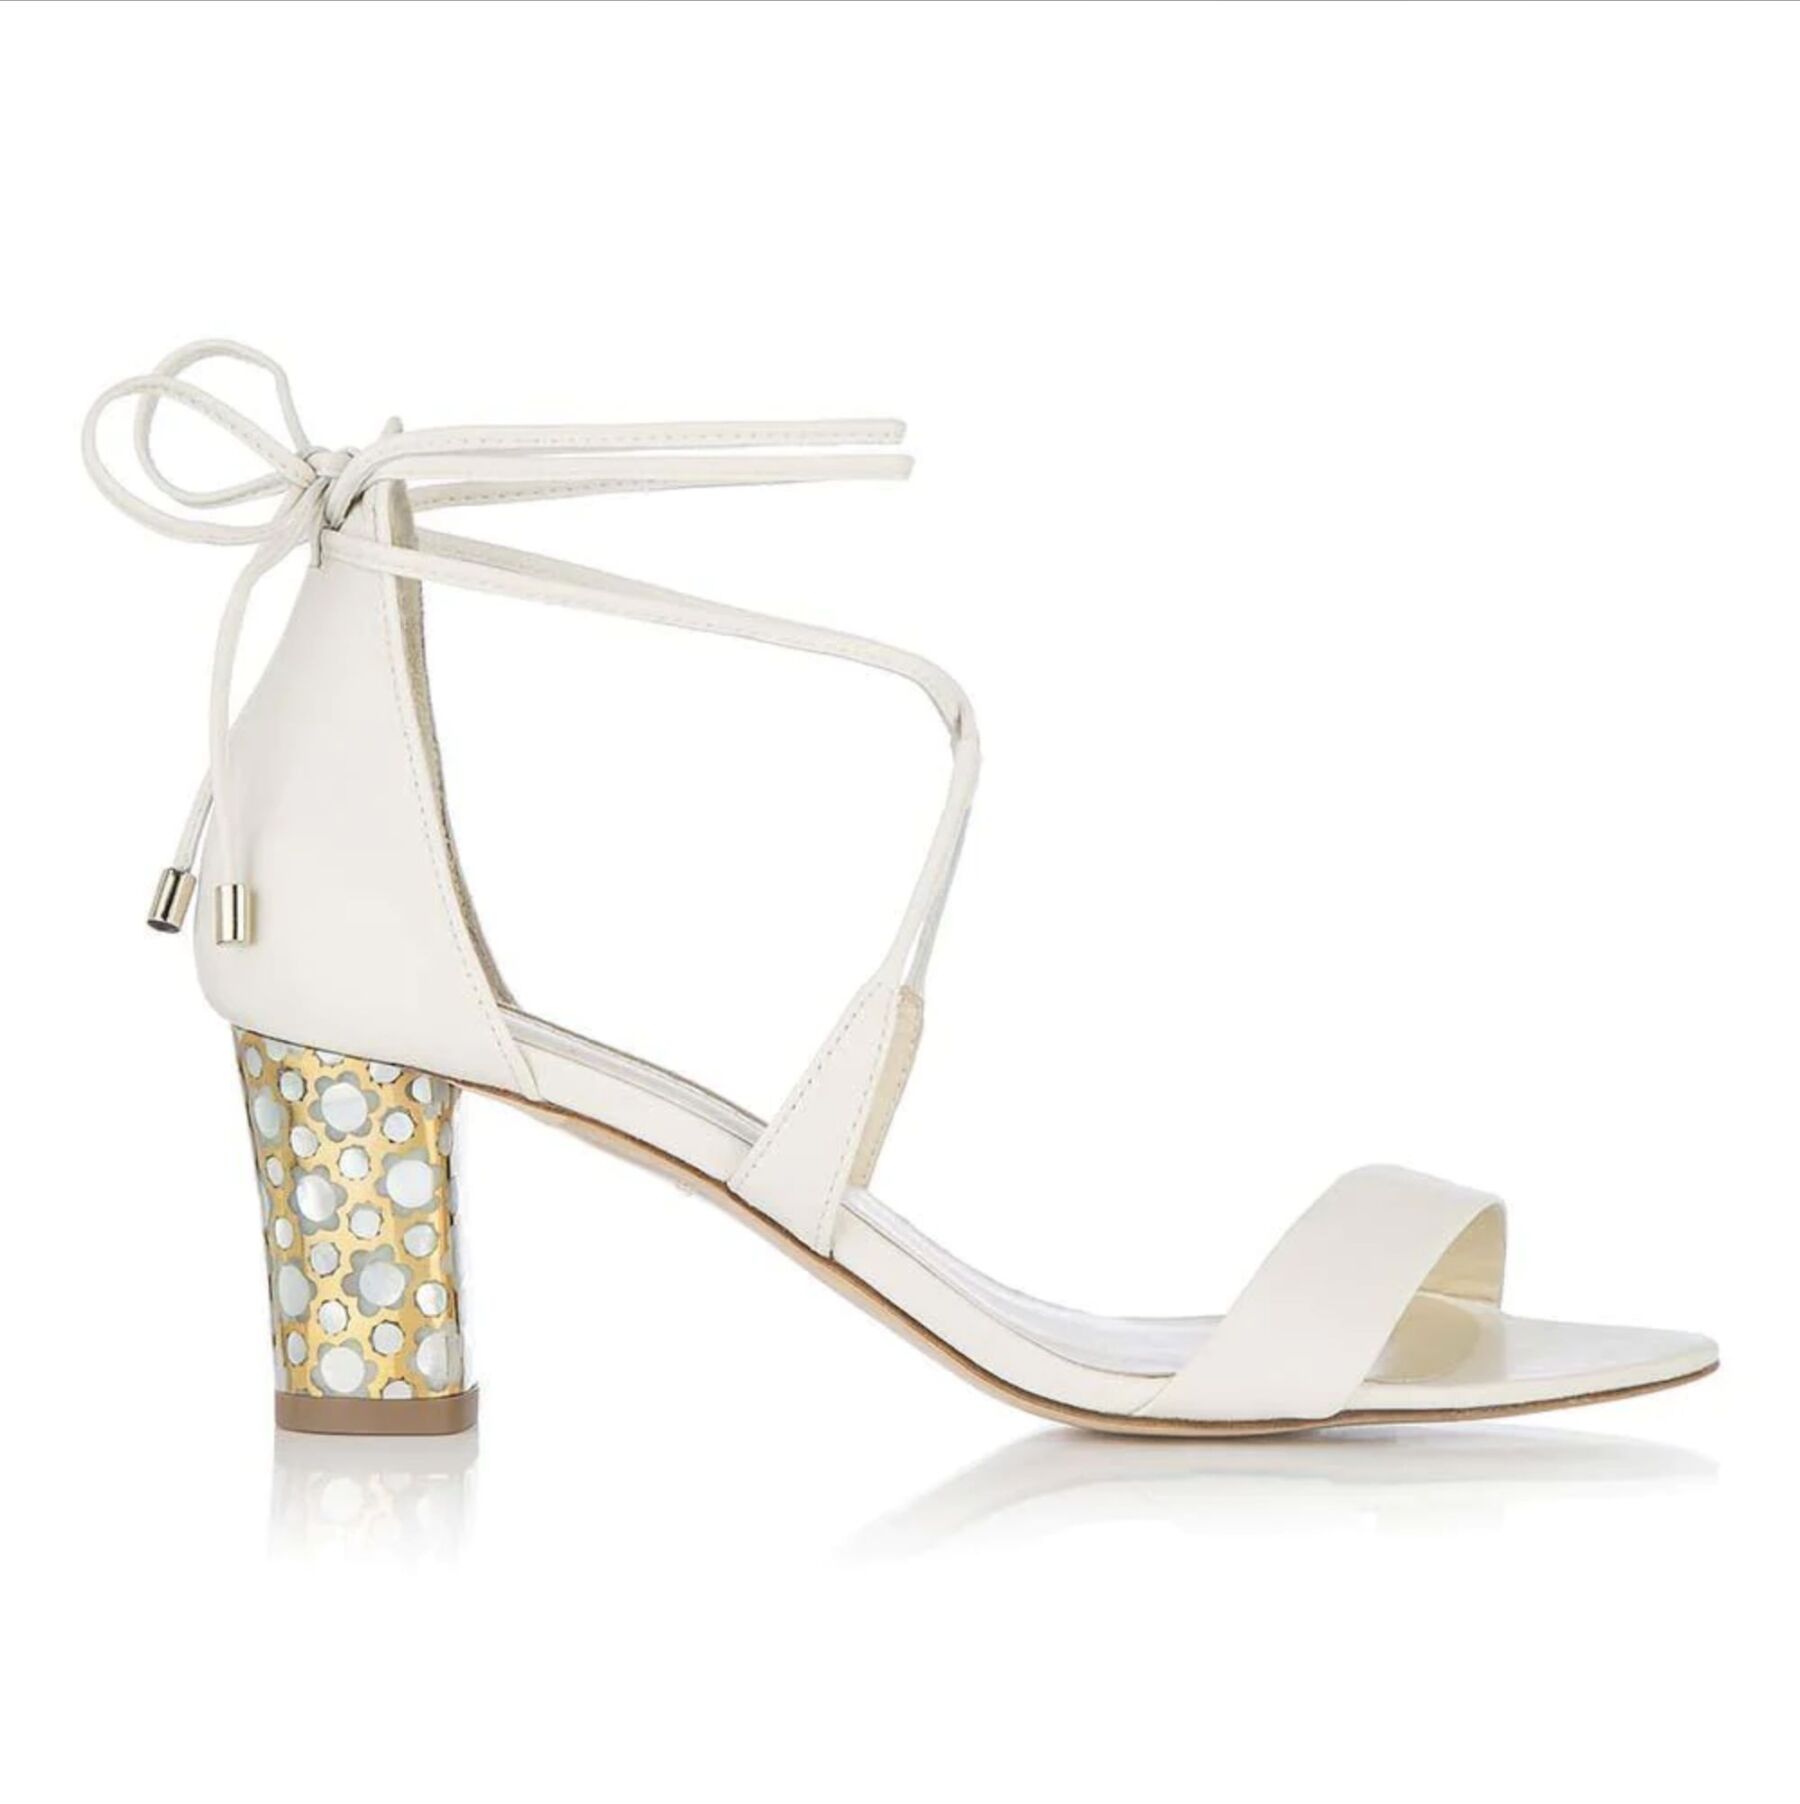 Freya Rose London Hester Mother of Pearl Wedding Shoes with Polished Mid Heel